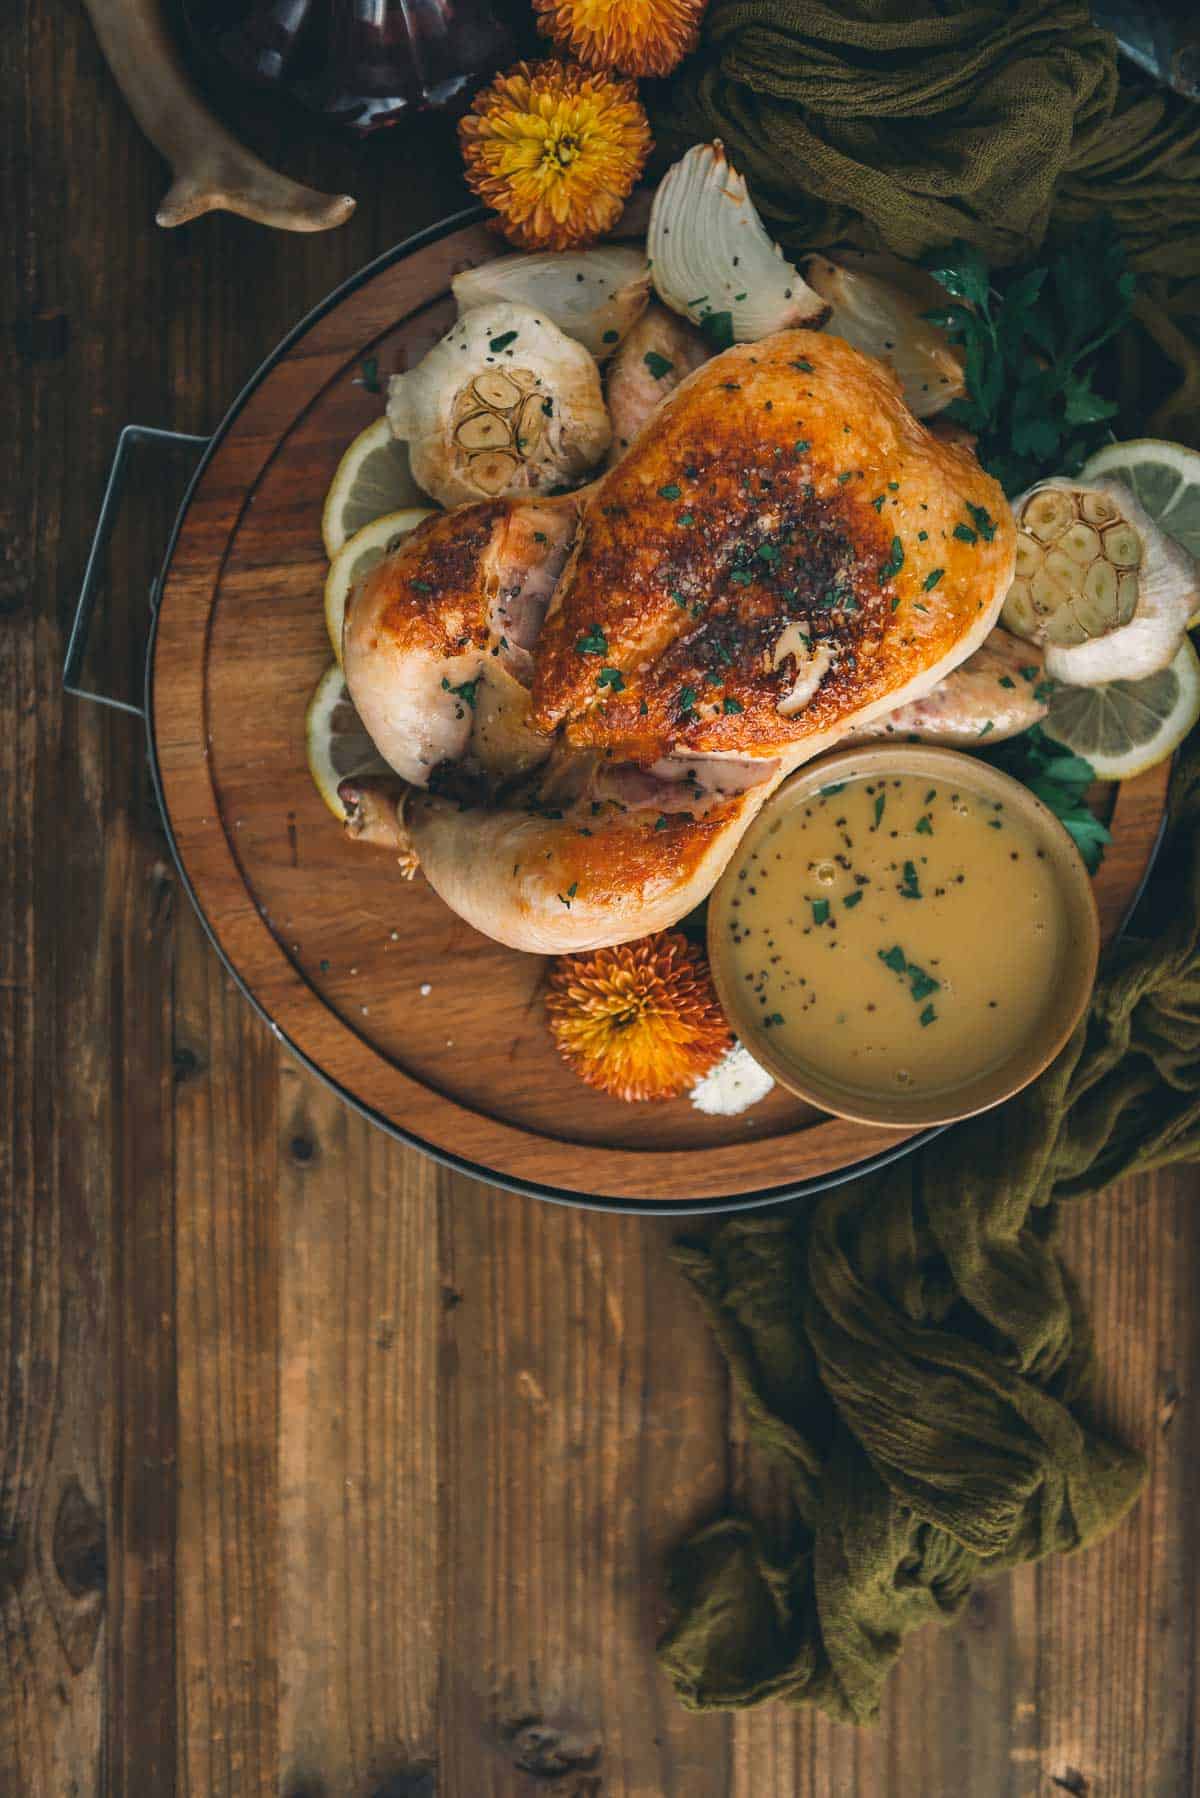 Roasted chicken with white wine pan sauce on a wooden table.